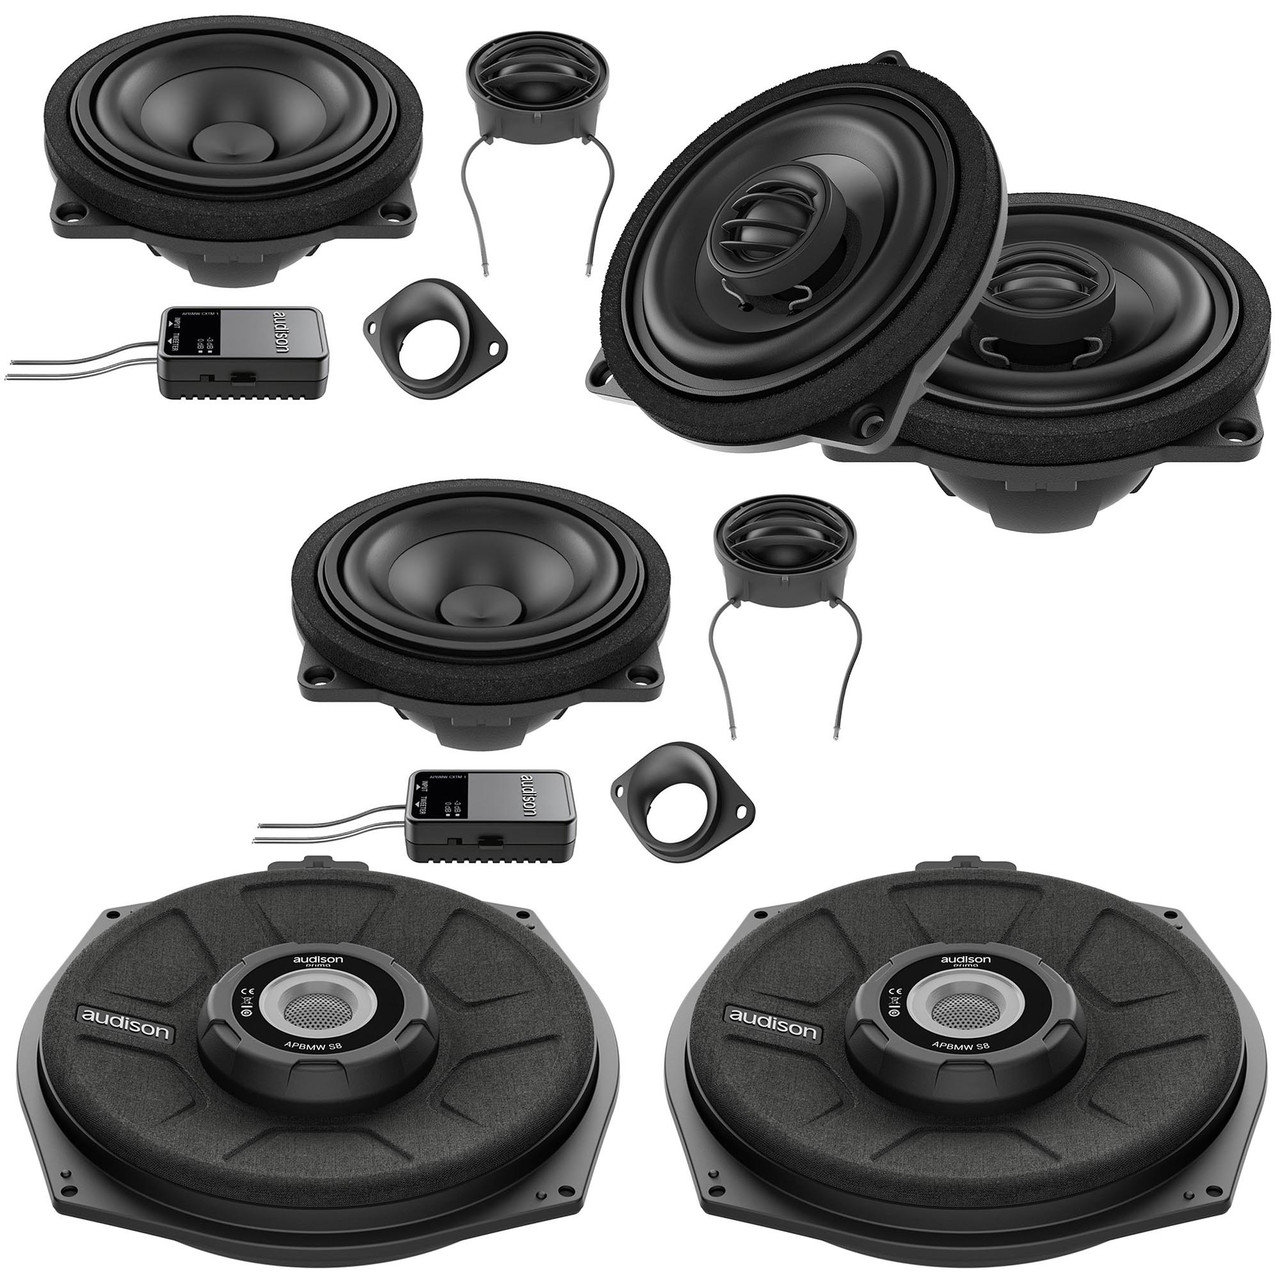 Audison Front Speakers, Rear Speakers & Subwoofer Bundle Compatible With 07-13 BMW 3 Series E93 HiFi Sound System - Creative Audio